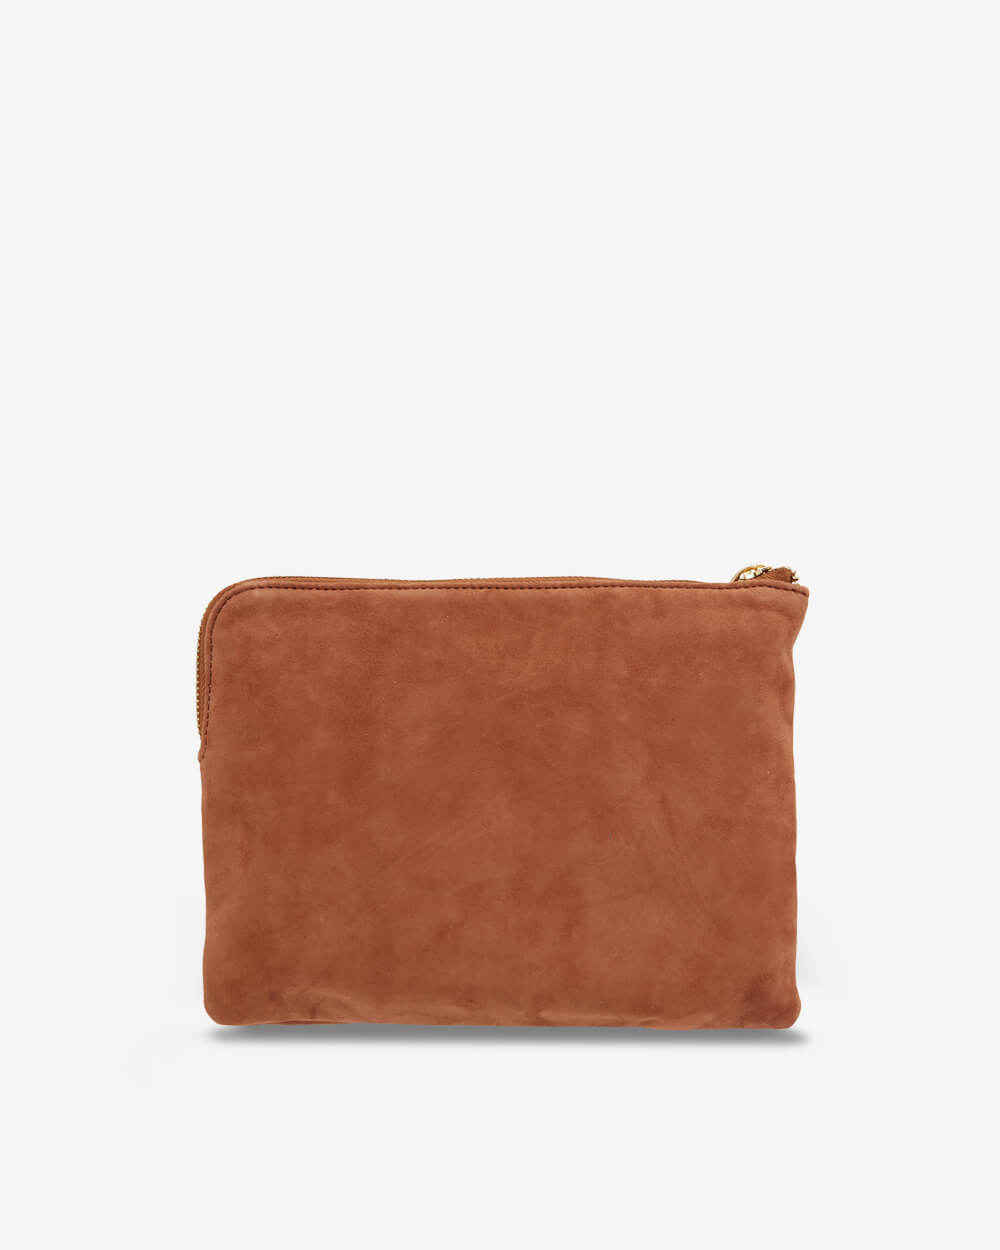 Paige Clutch - Gingerbread Suede